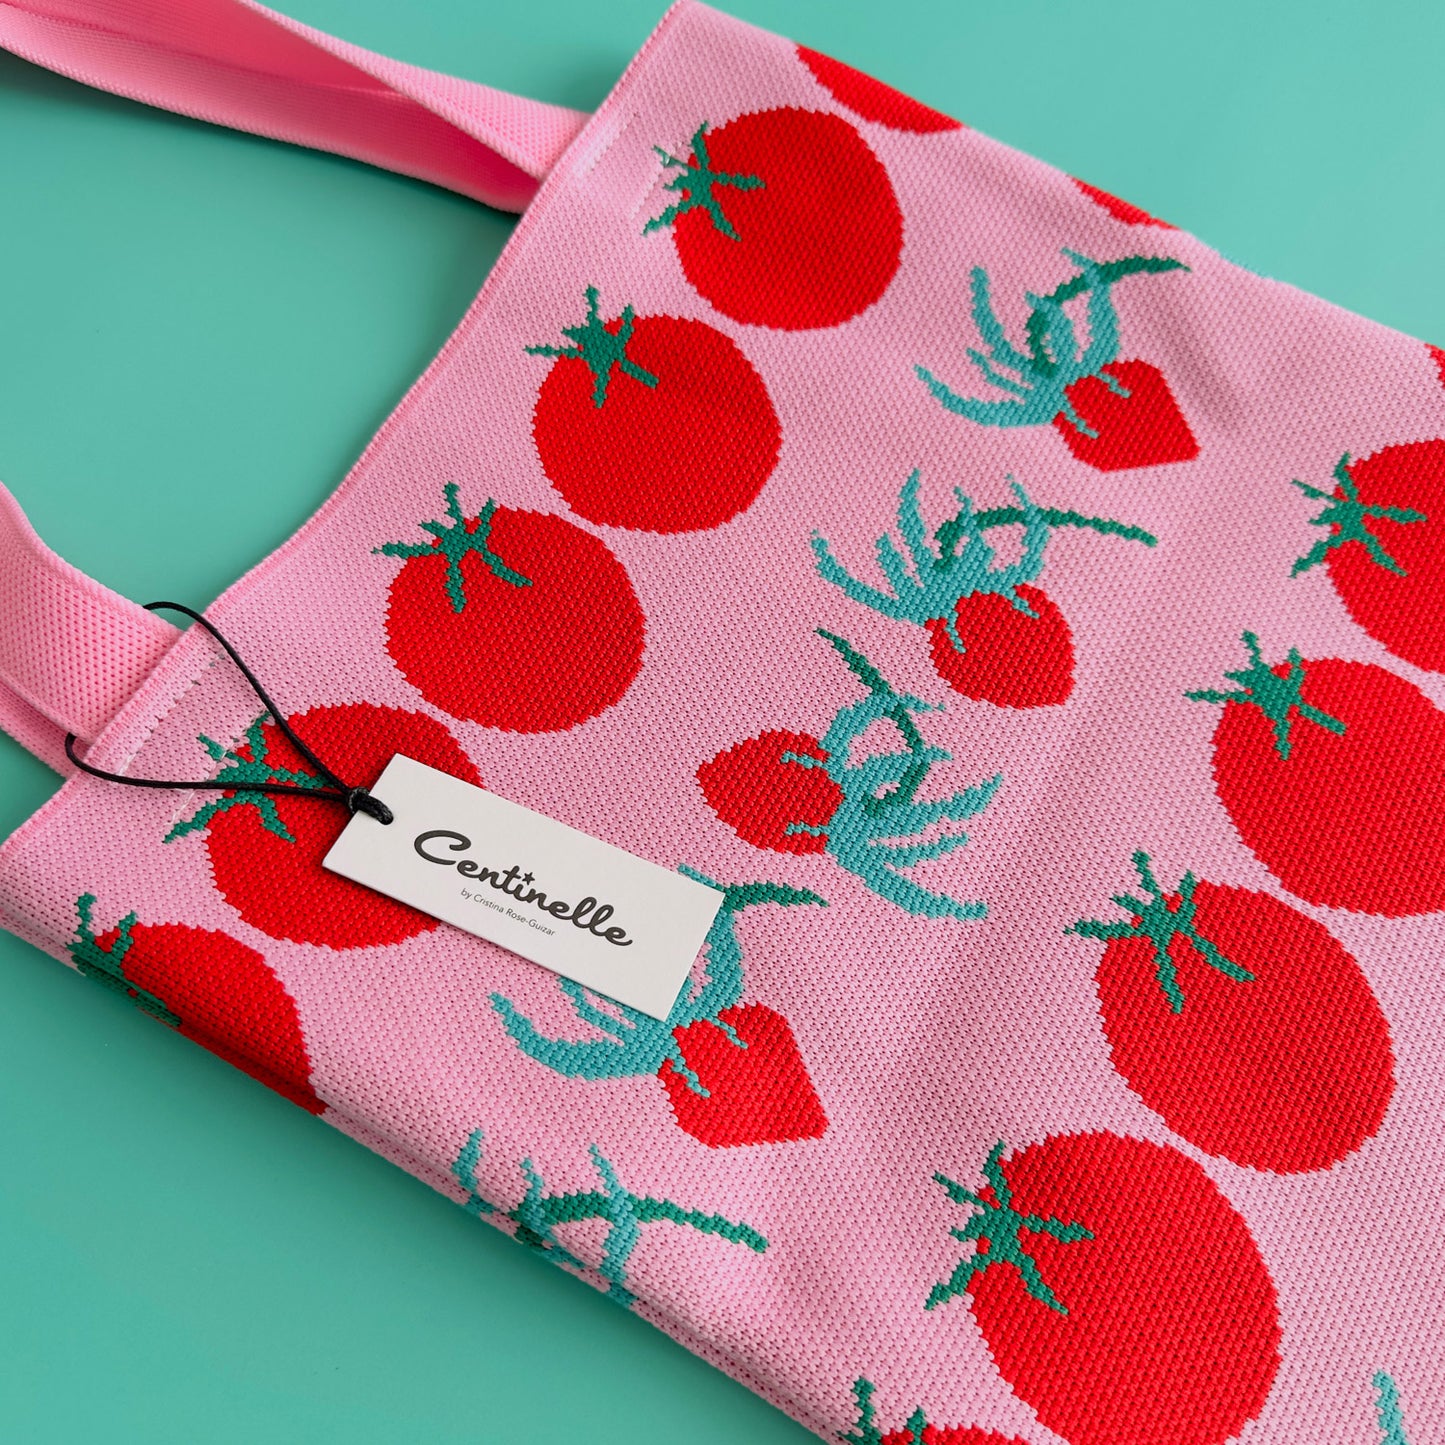 A pink centinelle tote bag with tomatoes on it.